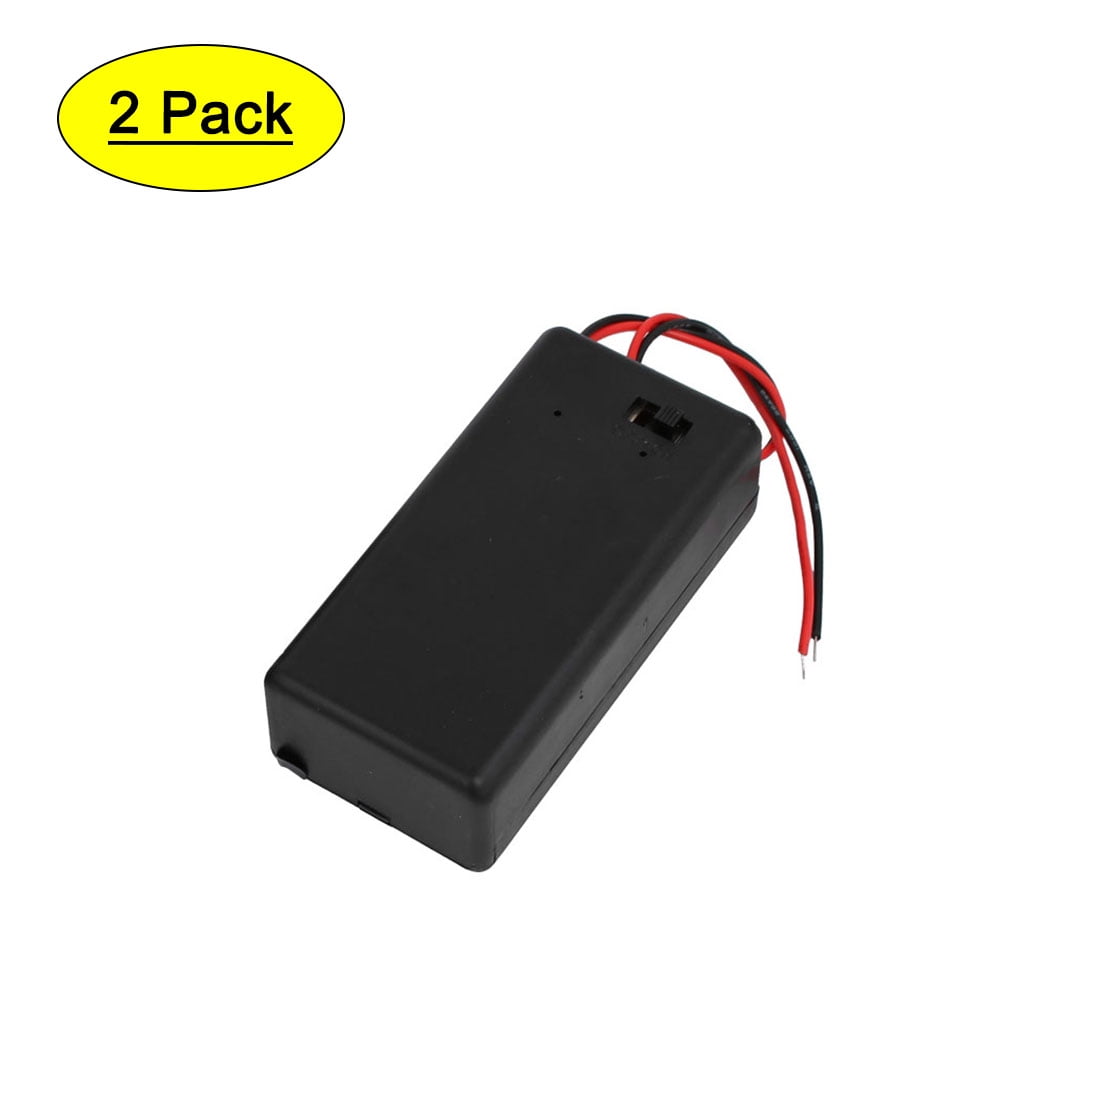 5x 2 Wires DC 9V Cell Volt Battery Storage Clip Holder Box Case Cover Well Made 